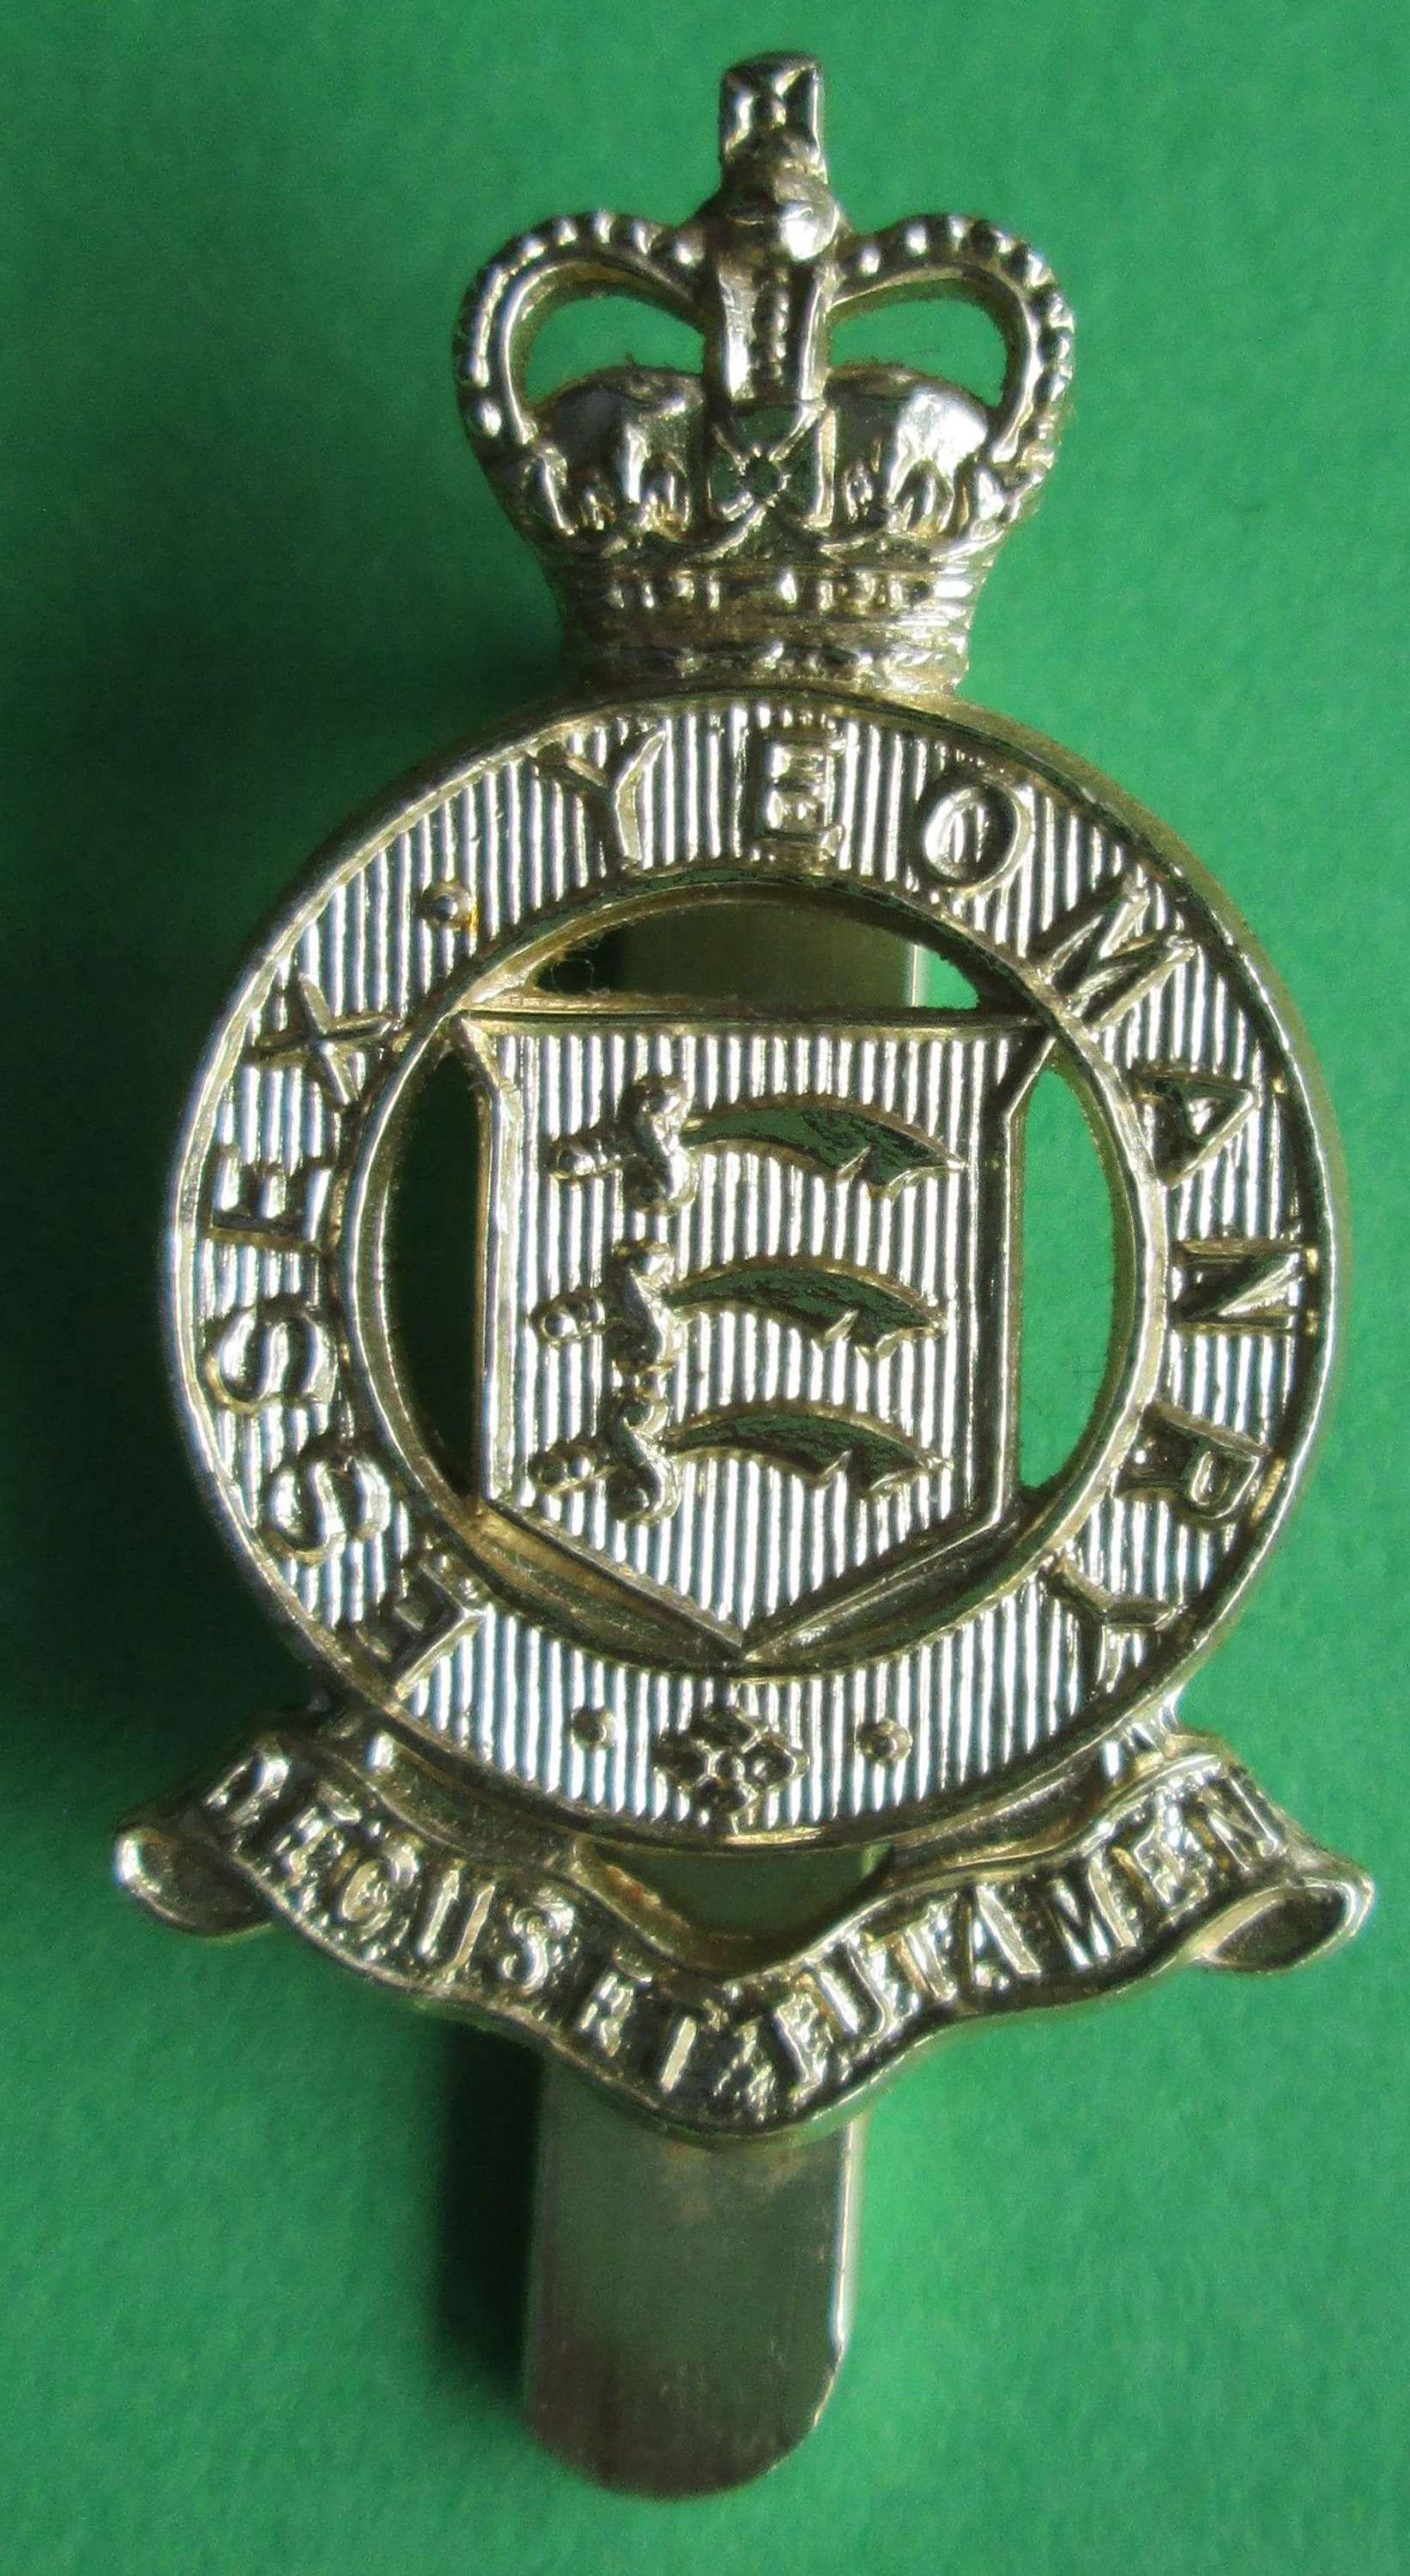 SCARCE ESSEX YEOMANRY SMALL STAY BRIGHT CAP BADGE